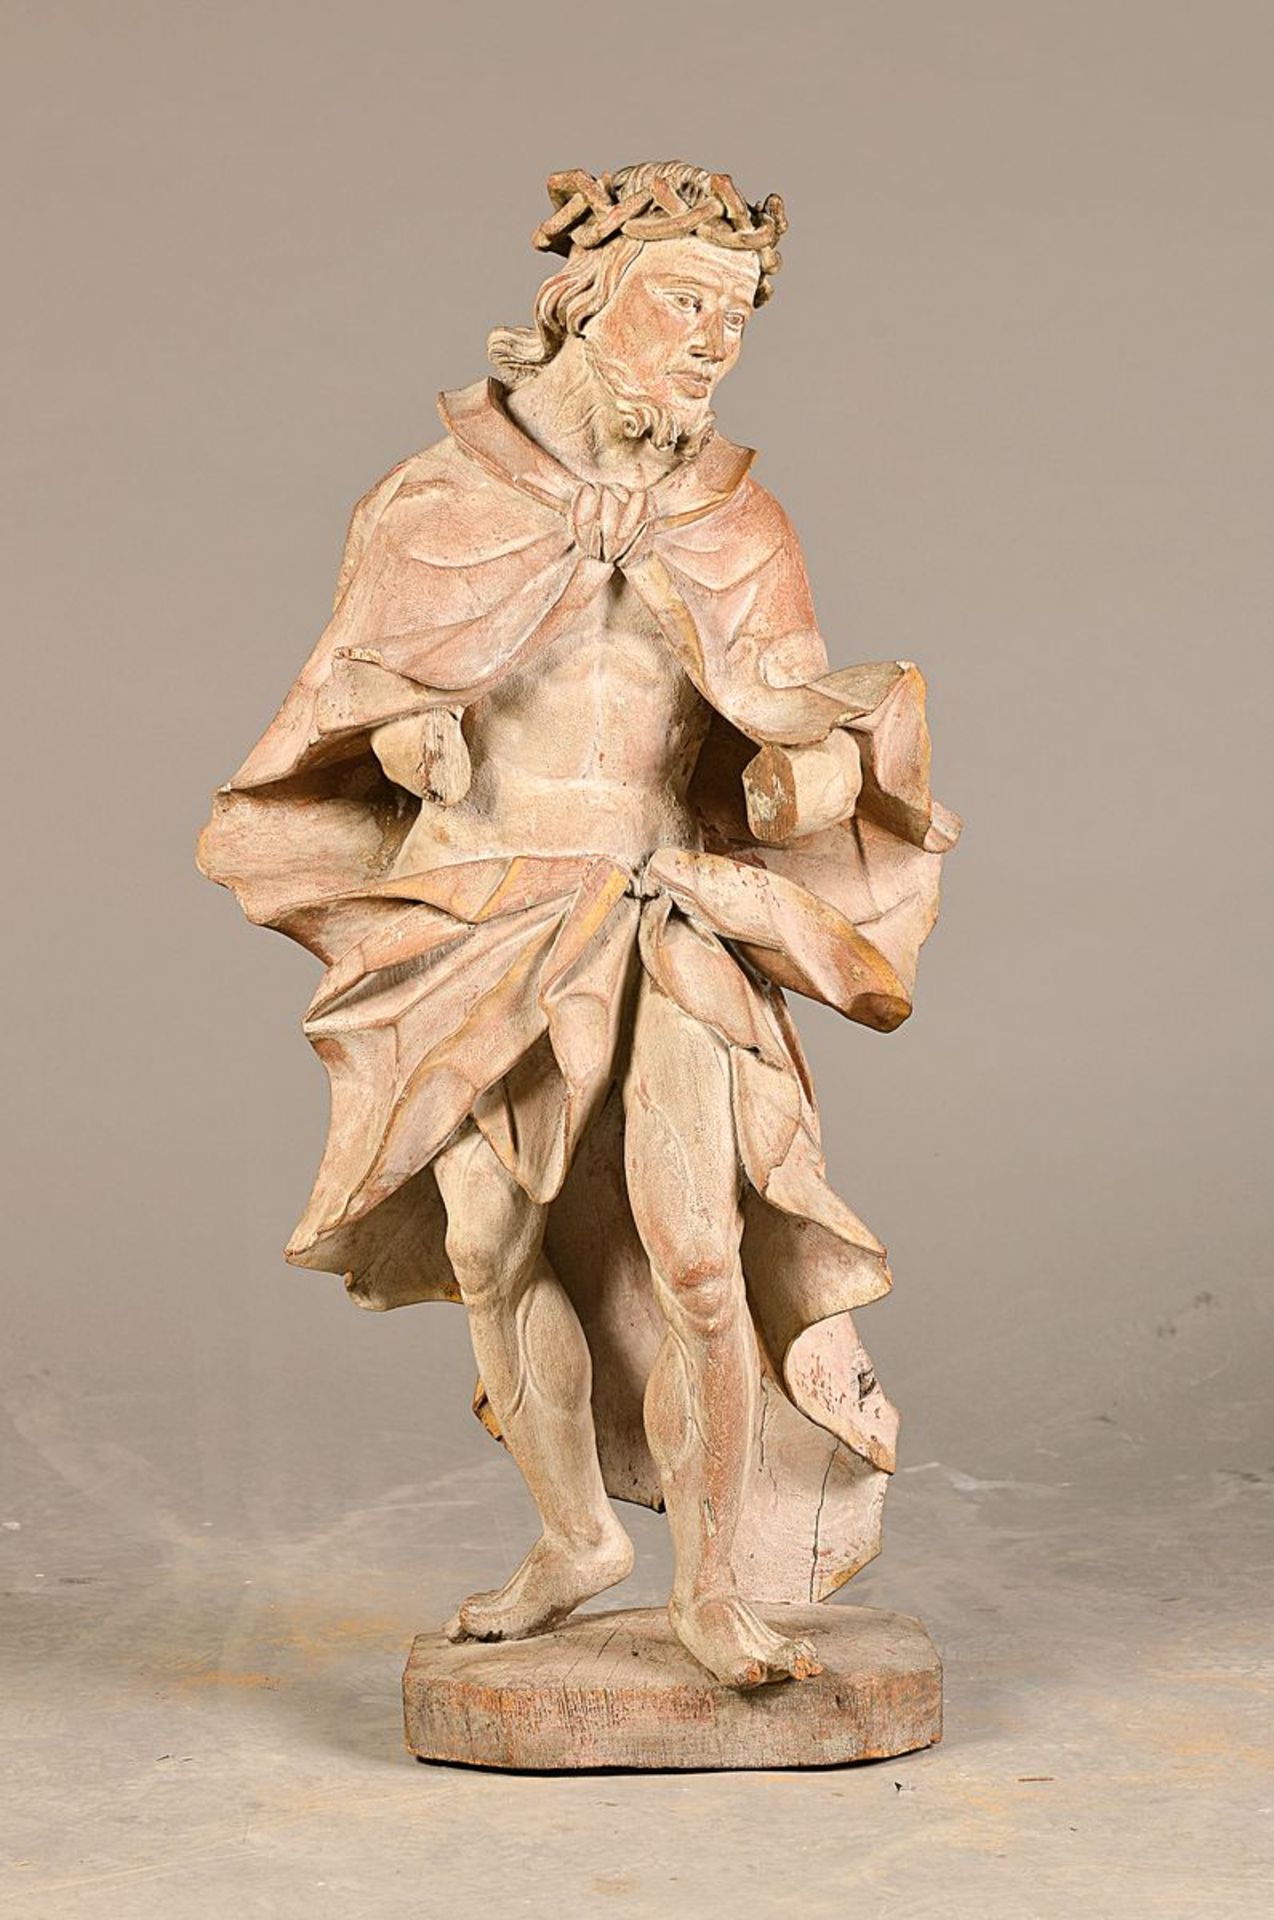 Christ with the crown of thorns, Southern Germany, 2nd half of 18th century, basswood carved and